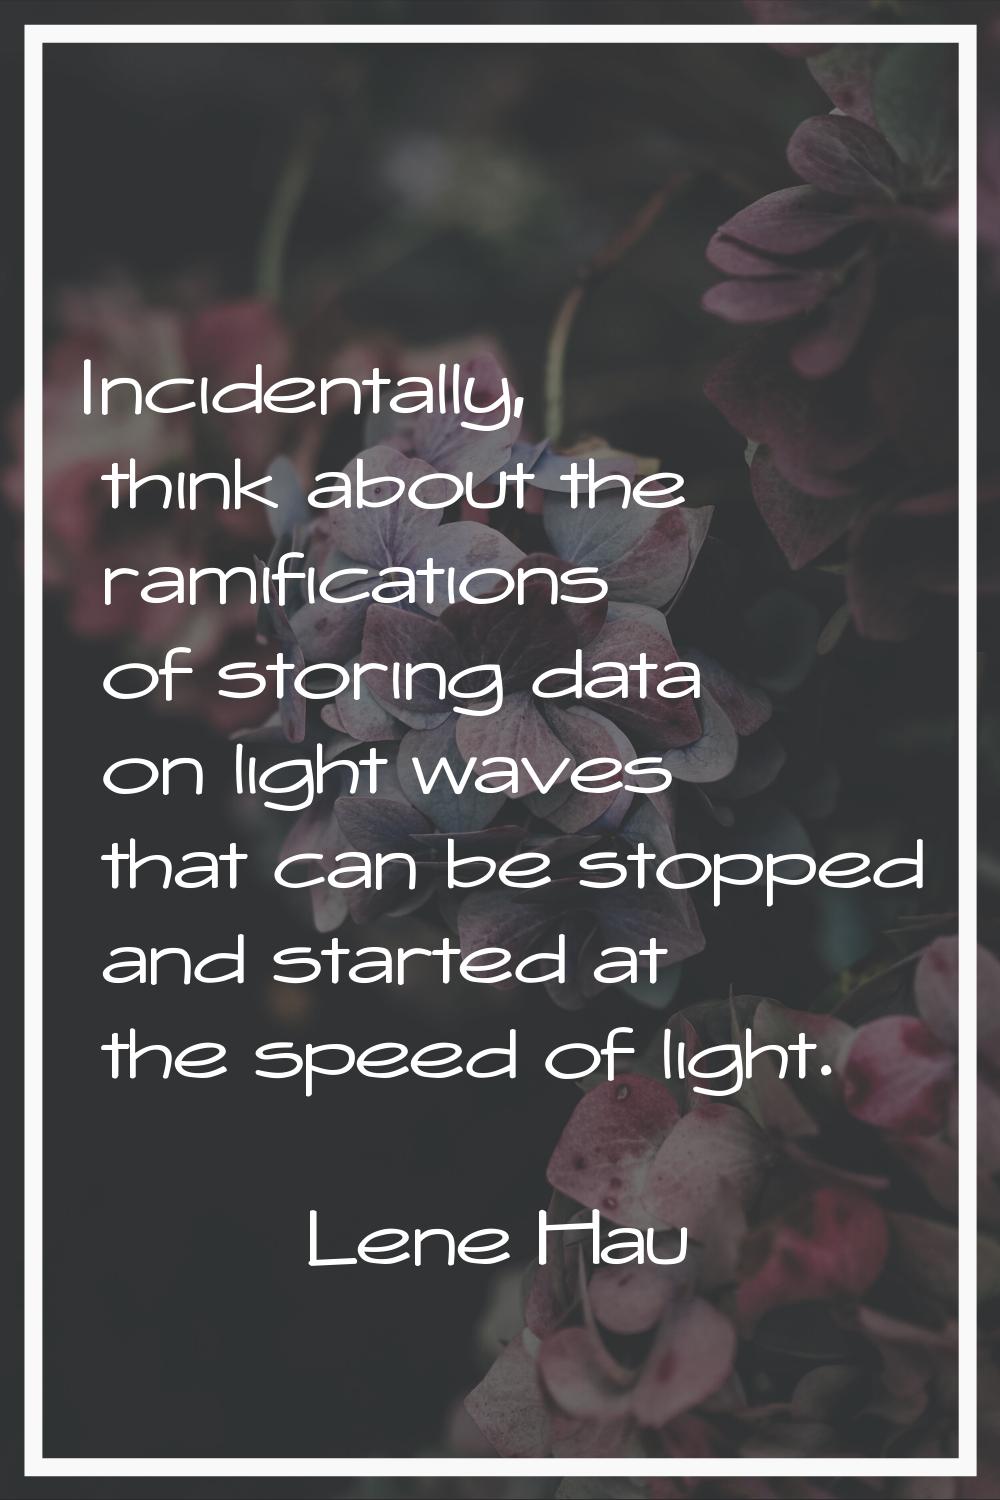 Incidentally, think about the ramifications of storing data on light waves that can be stopped and 